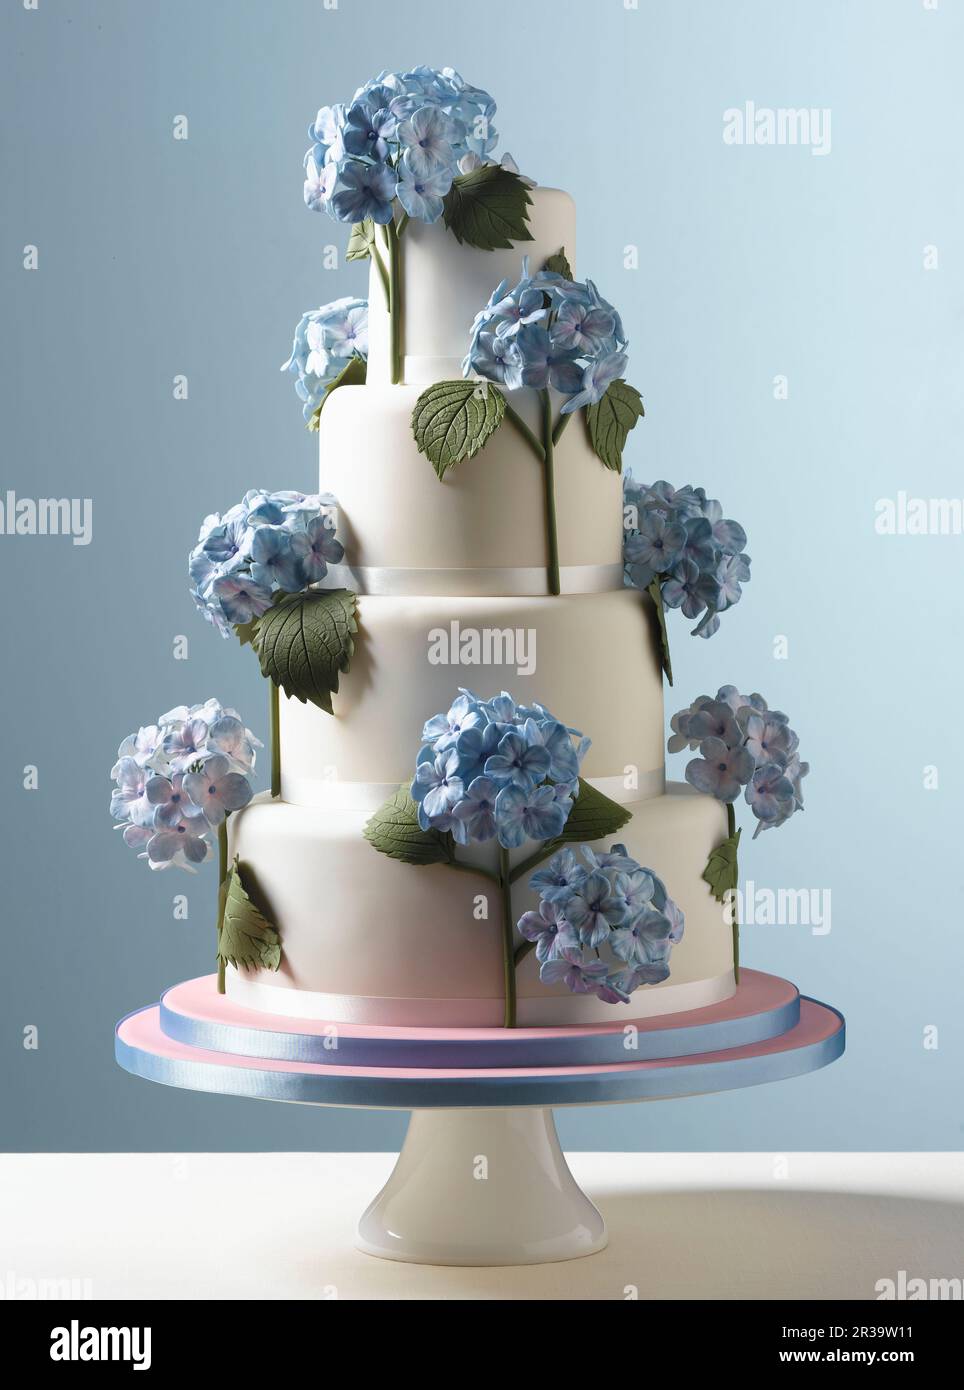 Easter Celebrations, tiered white wedding cake with blue hydrangea flowers with a pale blue background Stock Photo